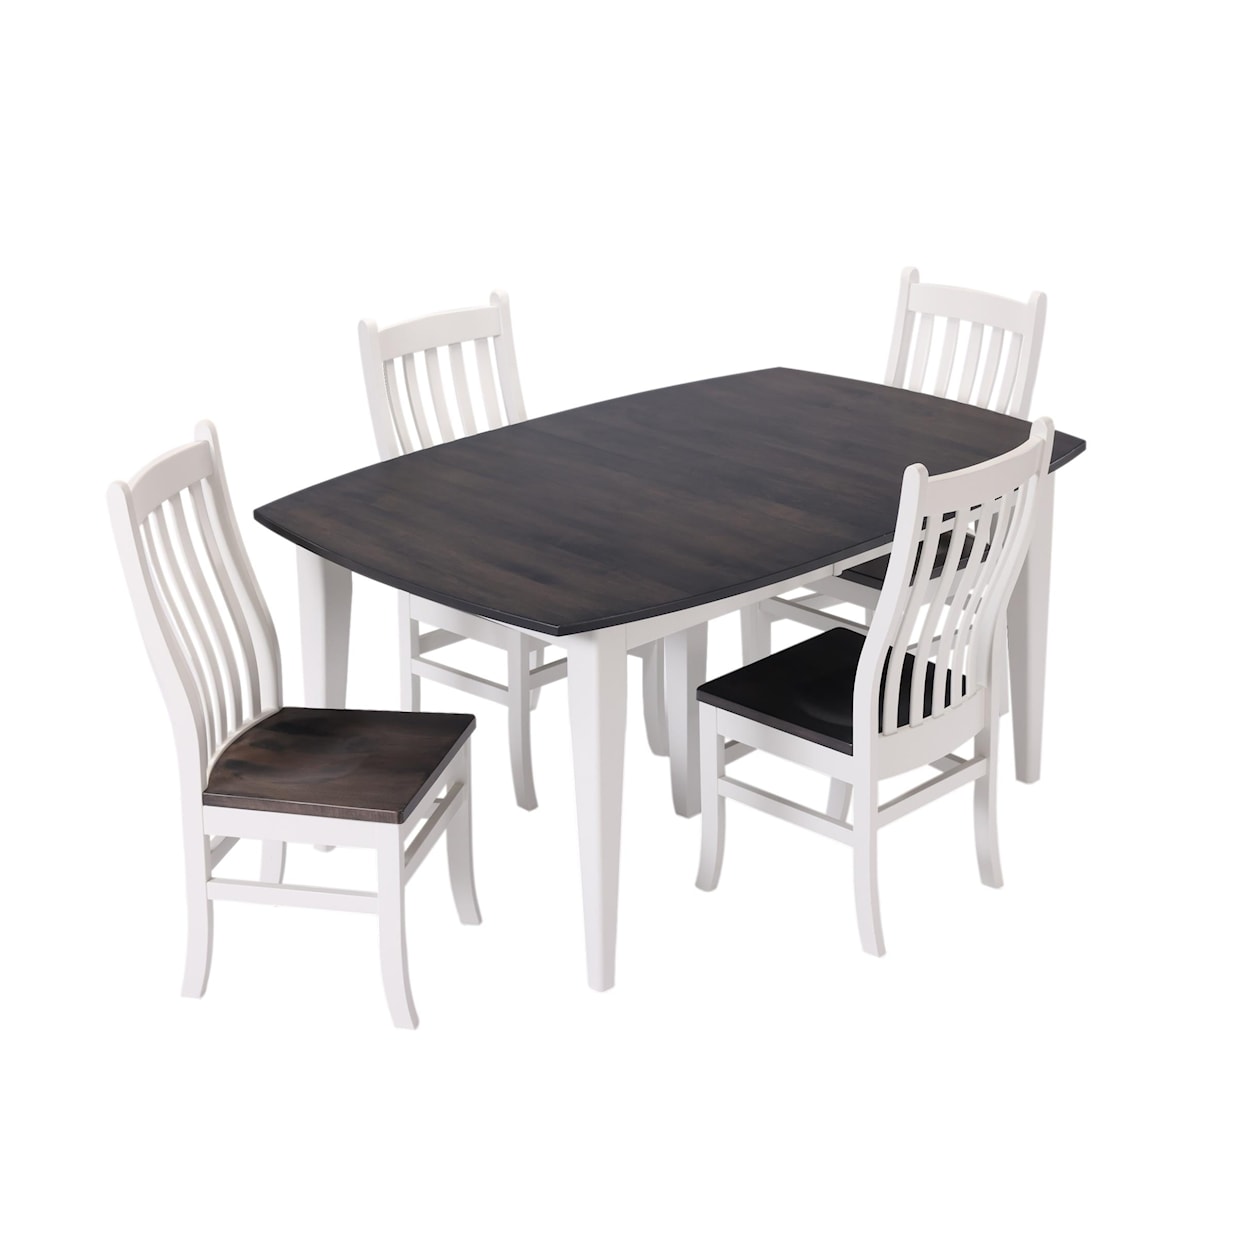 L.J. Gascho Furniture Maiden Casual Dining Set